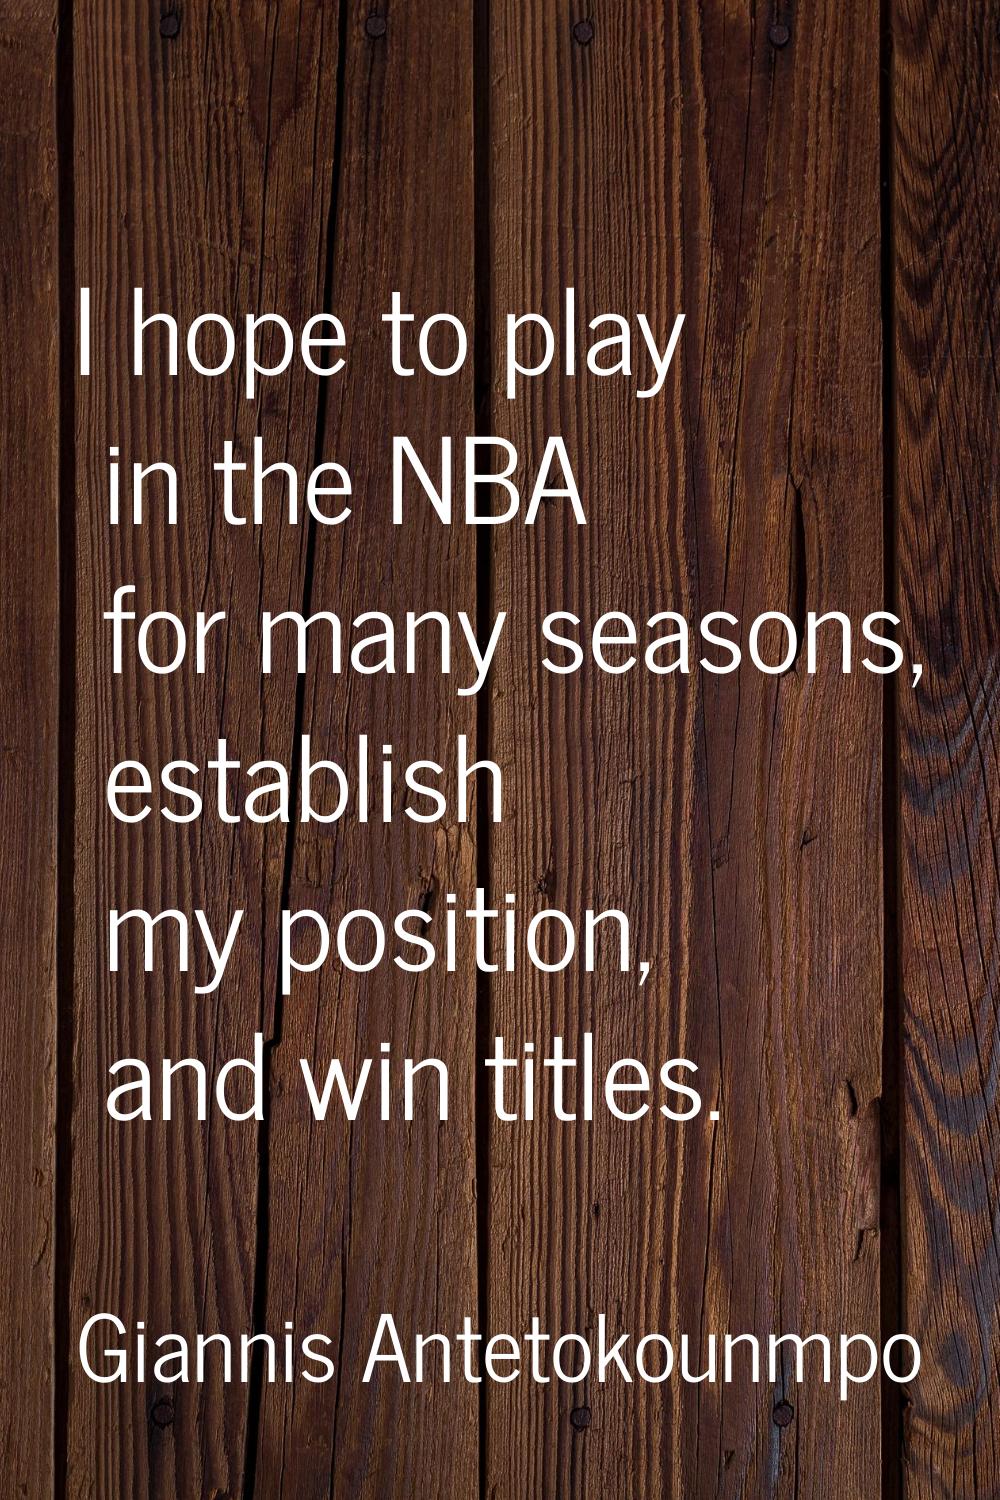 I hope to play in the NBA for many seasons, establish my position, and win titles.